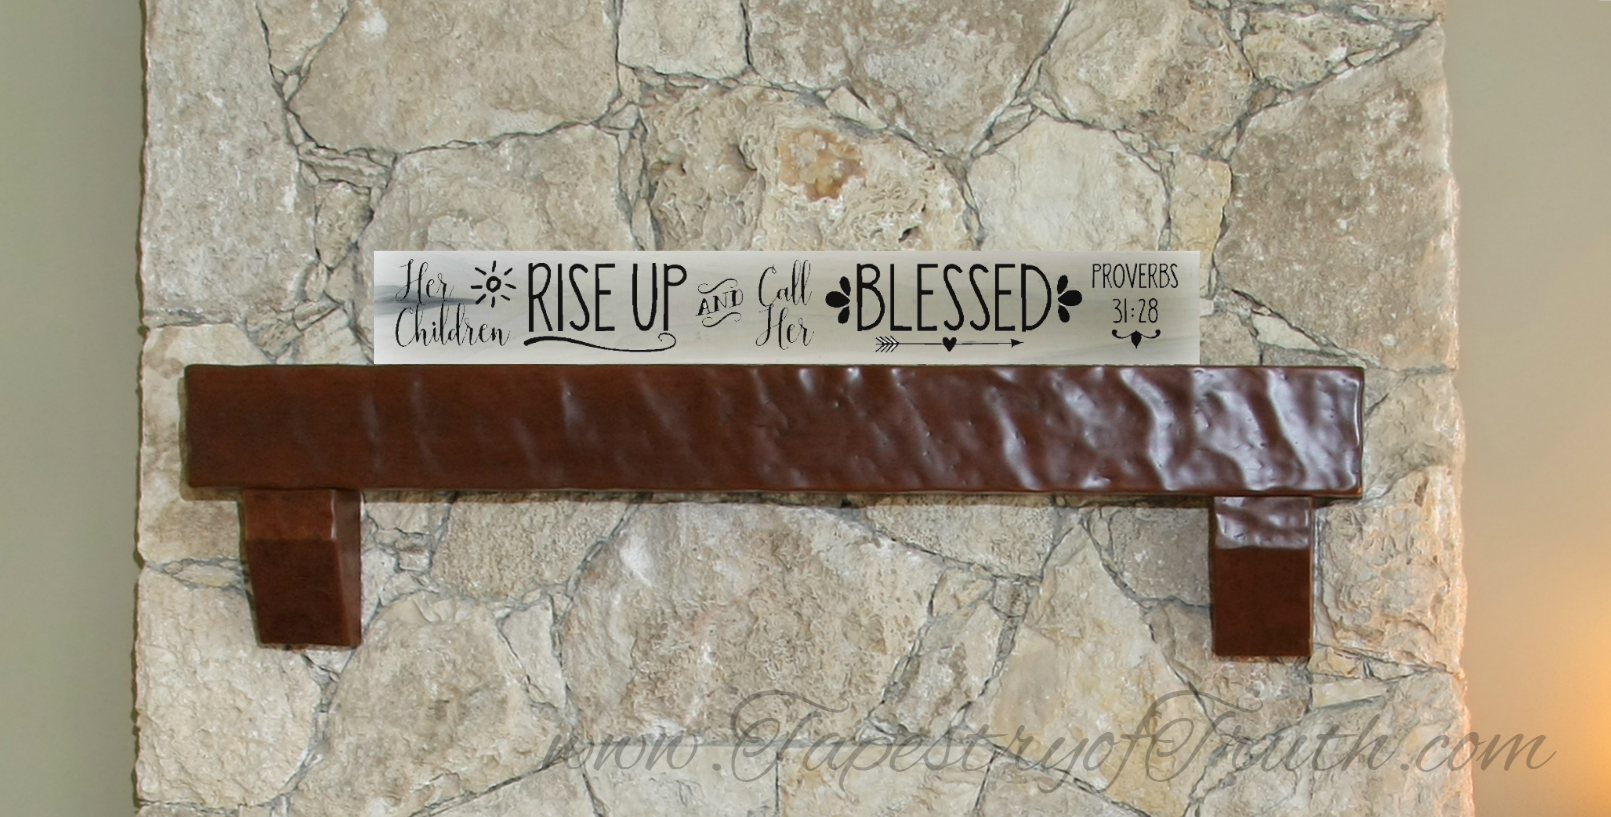 Her children rise up and call her blessed. Proverbs 31:28